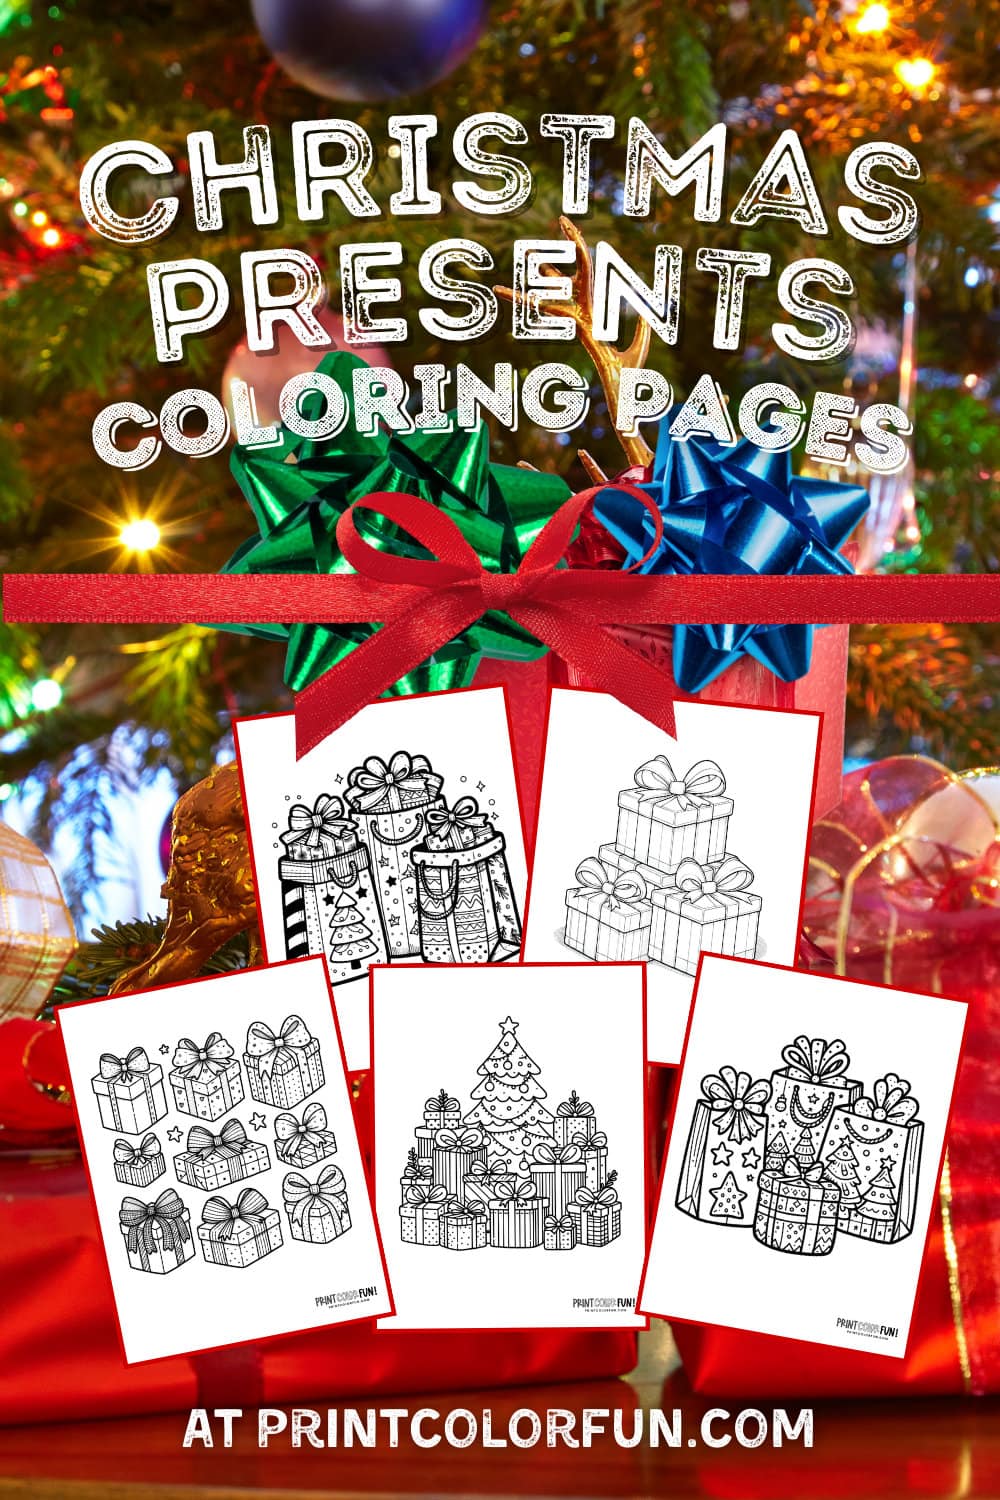 Cute Christmas present clipart and coloring pages at PrintColorFun com